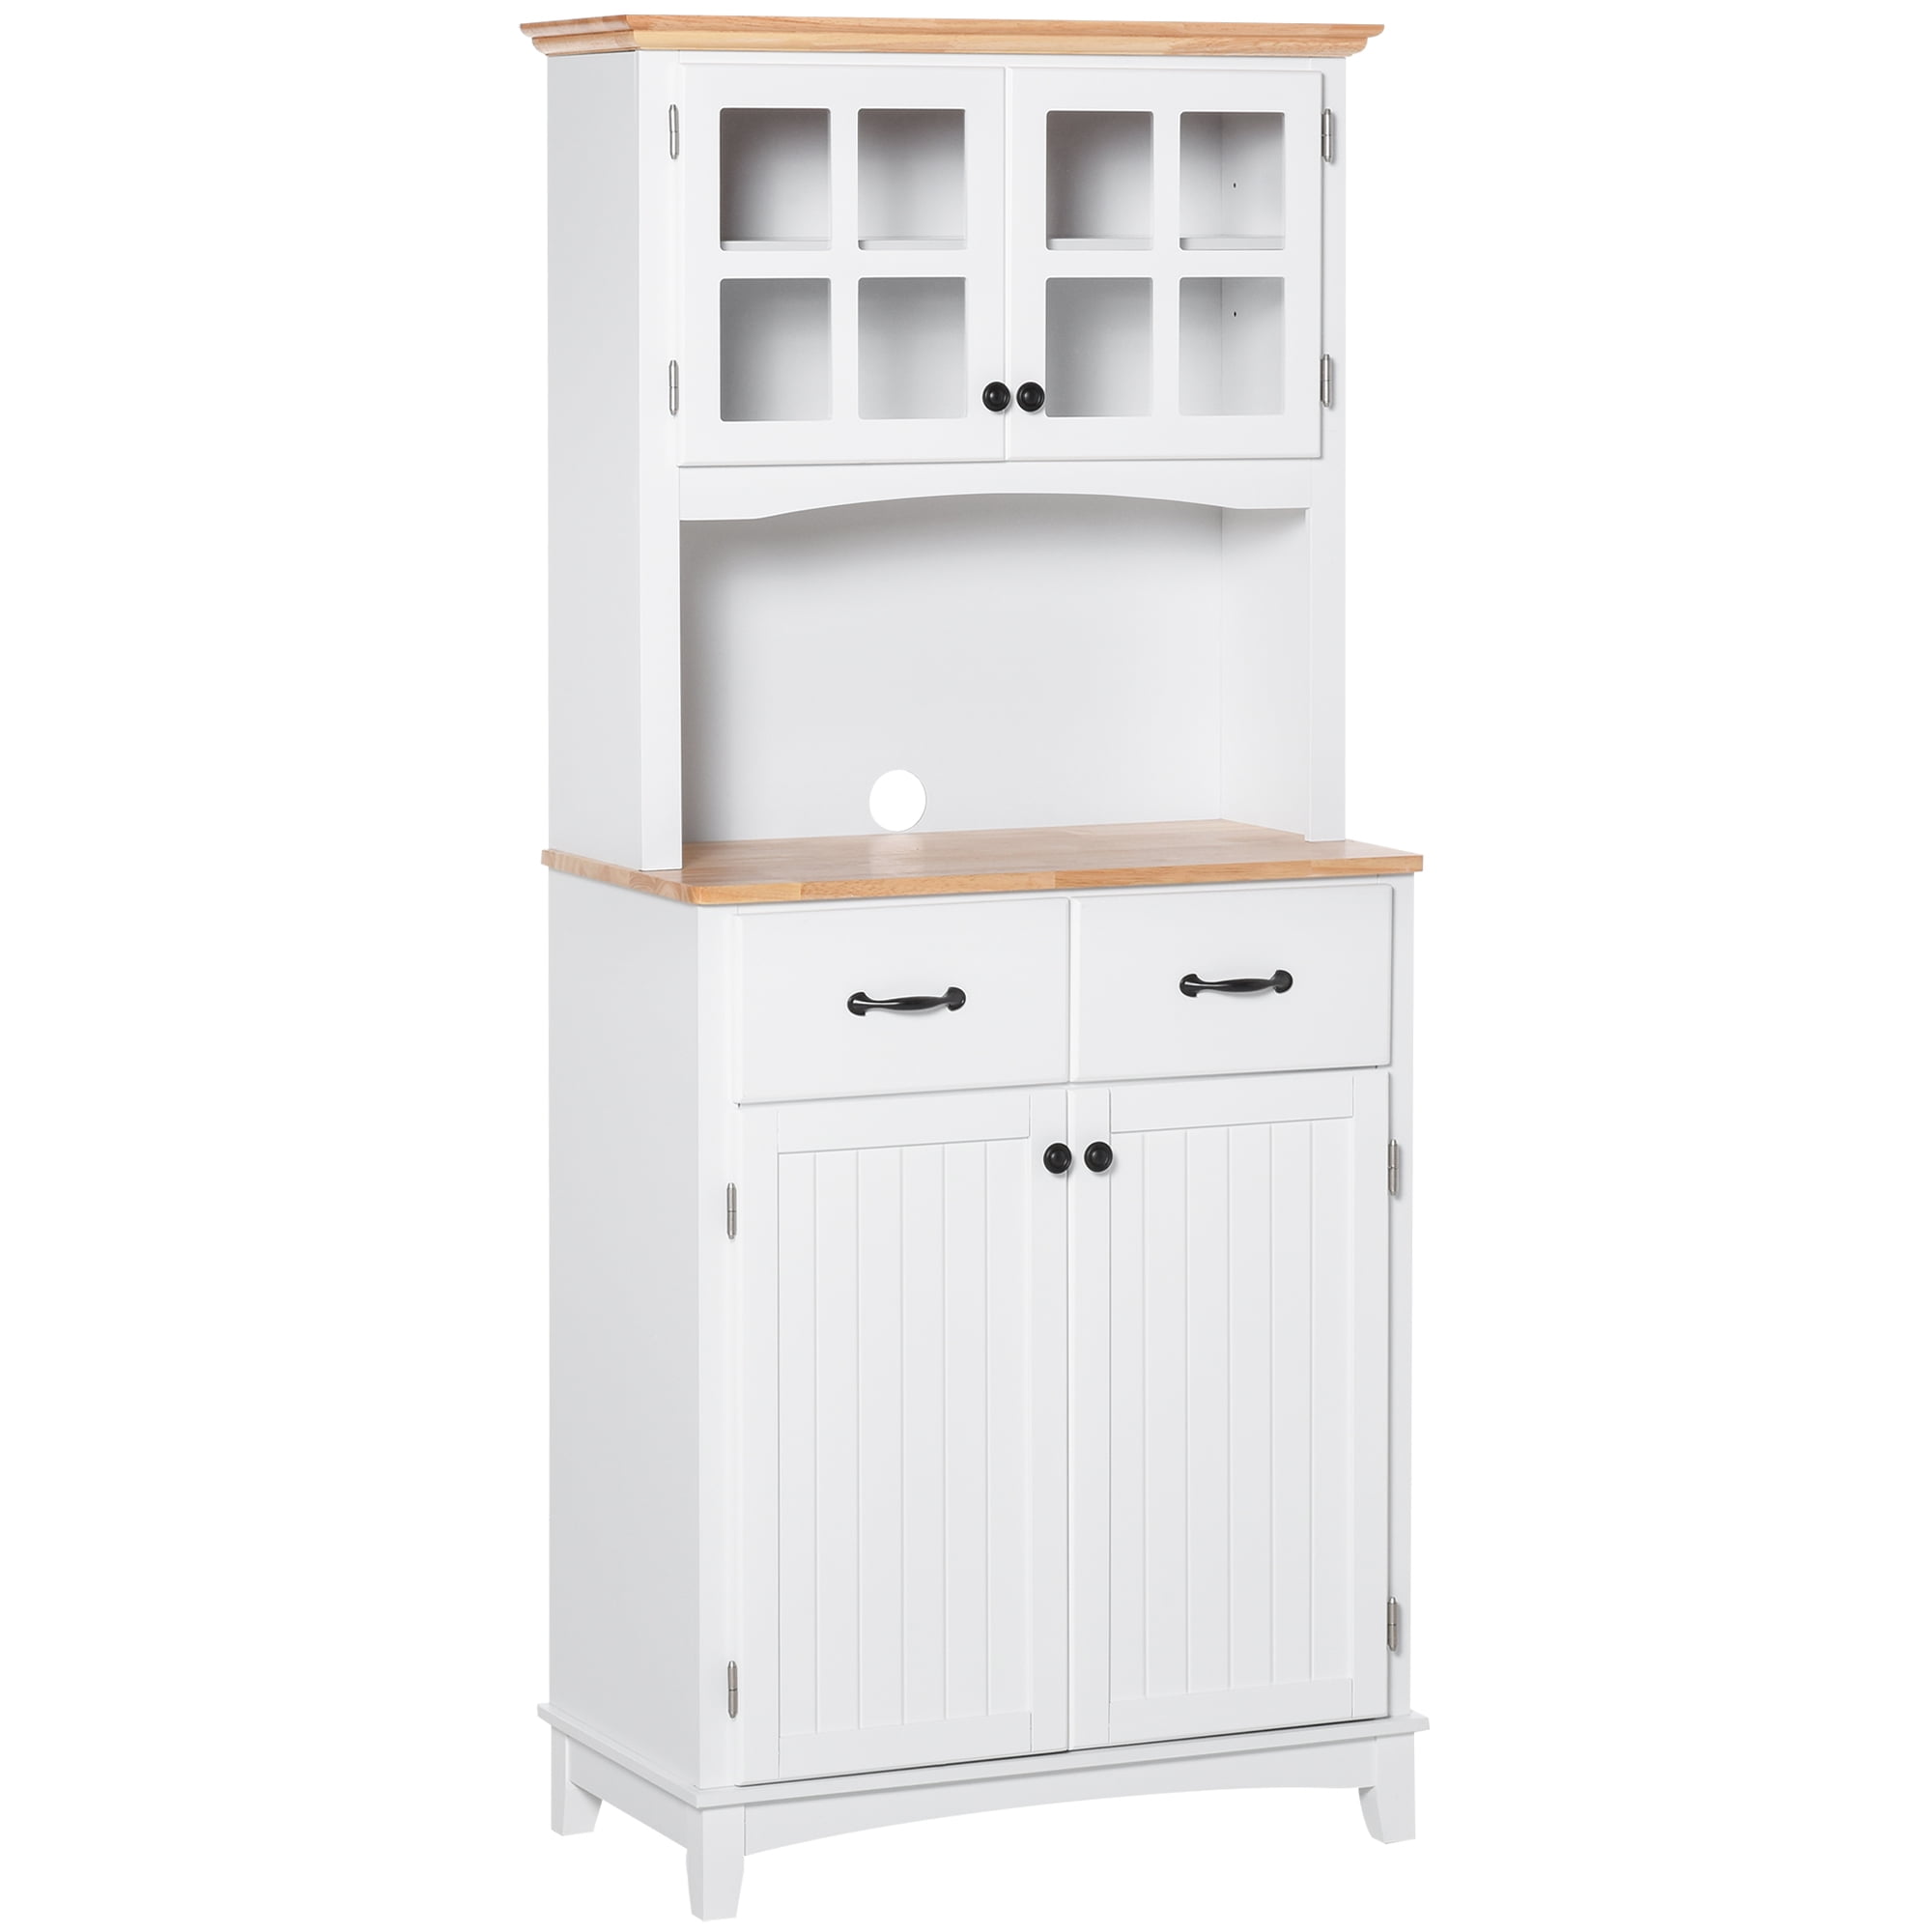 HOMCOM 67''H Traditional Freestanding Kitchen Pantry Cabinet Cupboard ...